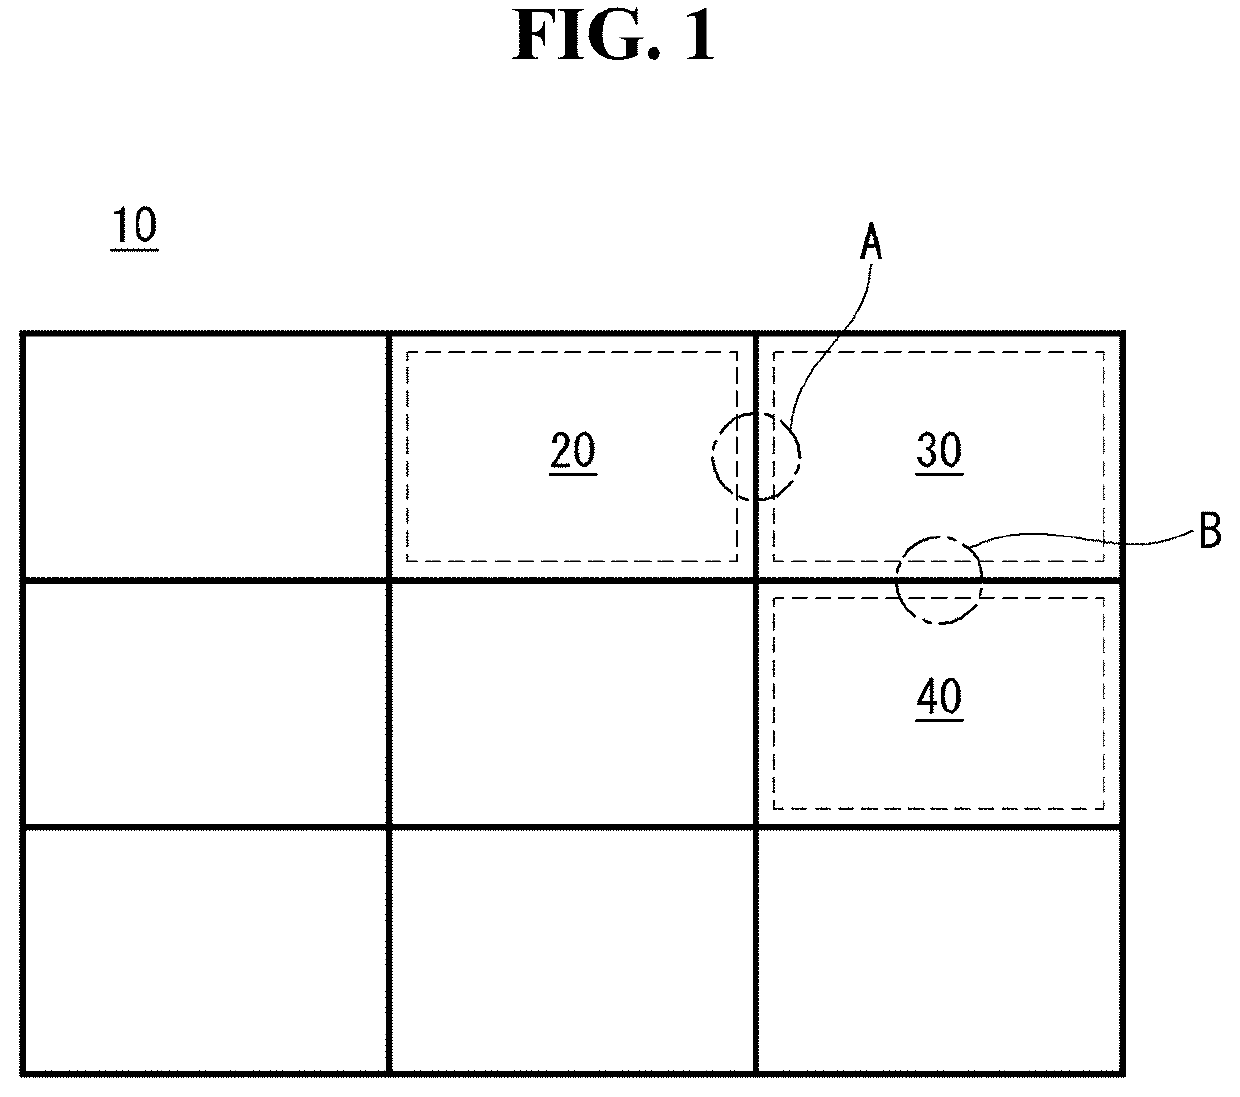 Tiling display device